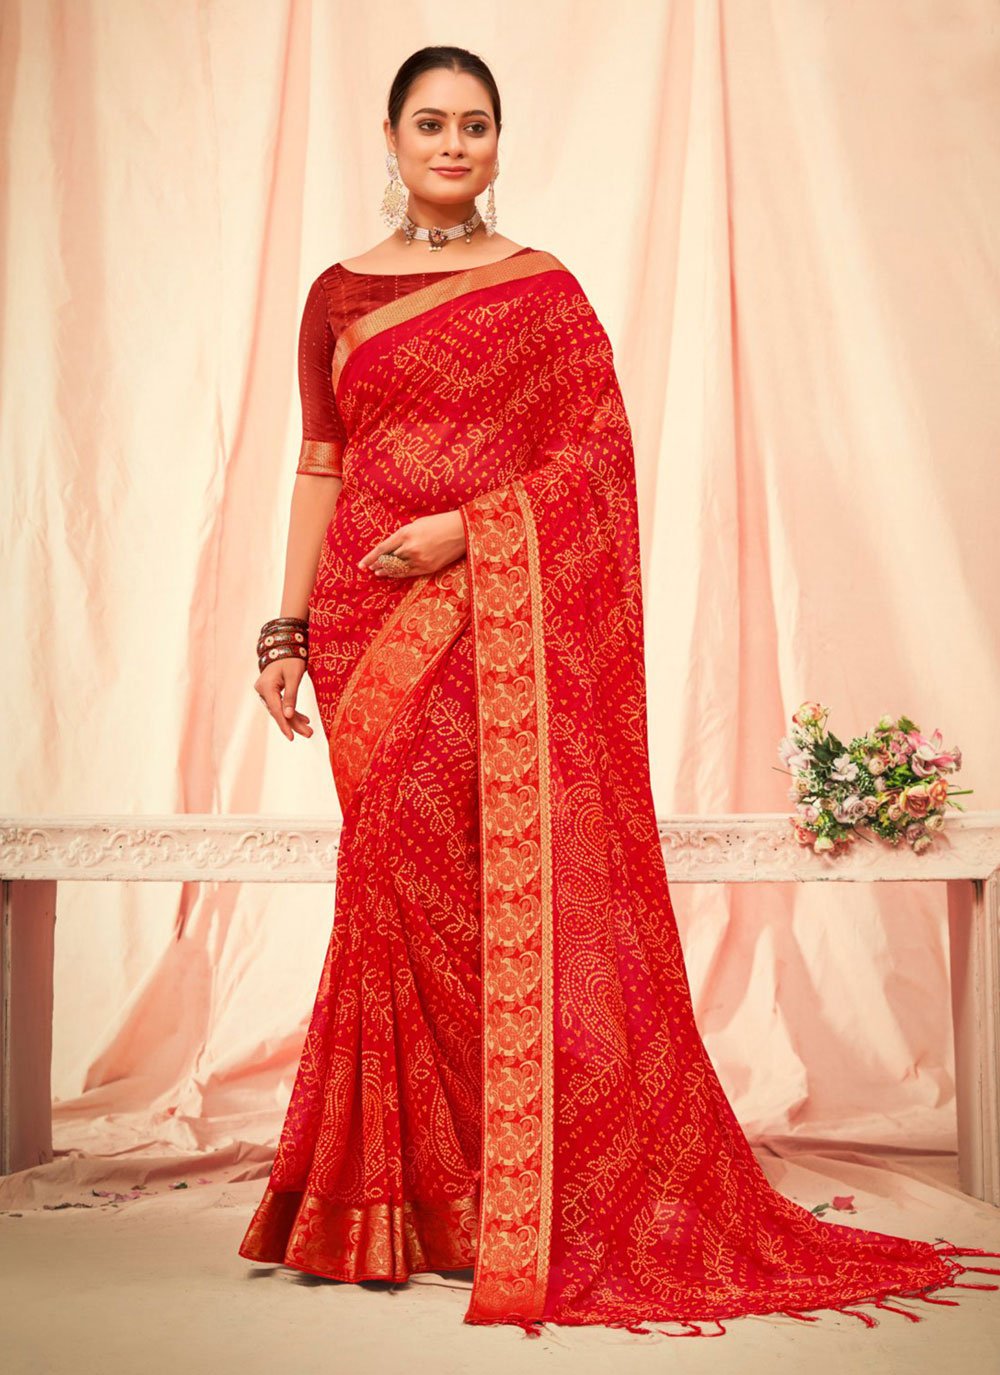 30 Contrast Blouse Designs For Red Silk Saree | Contrast blouse, Saree,  Blouse designs